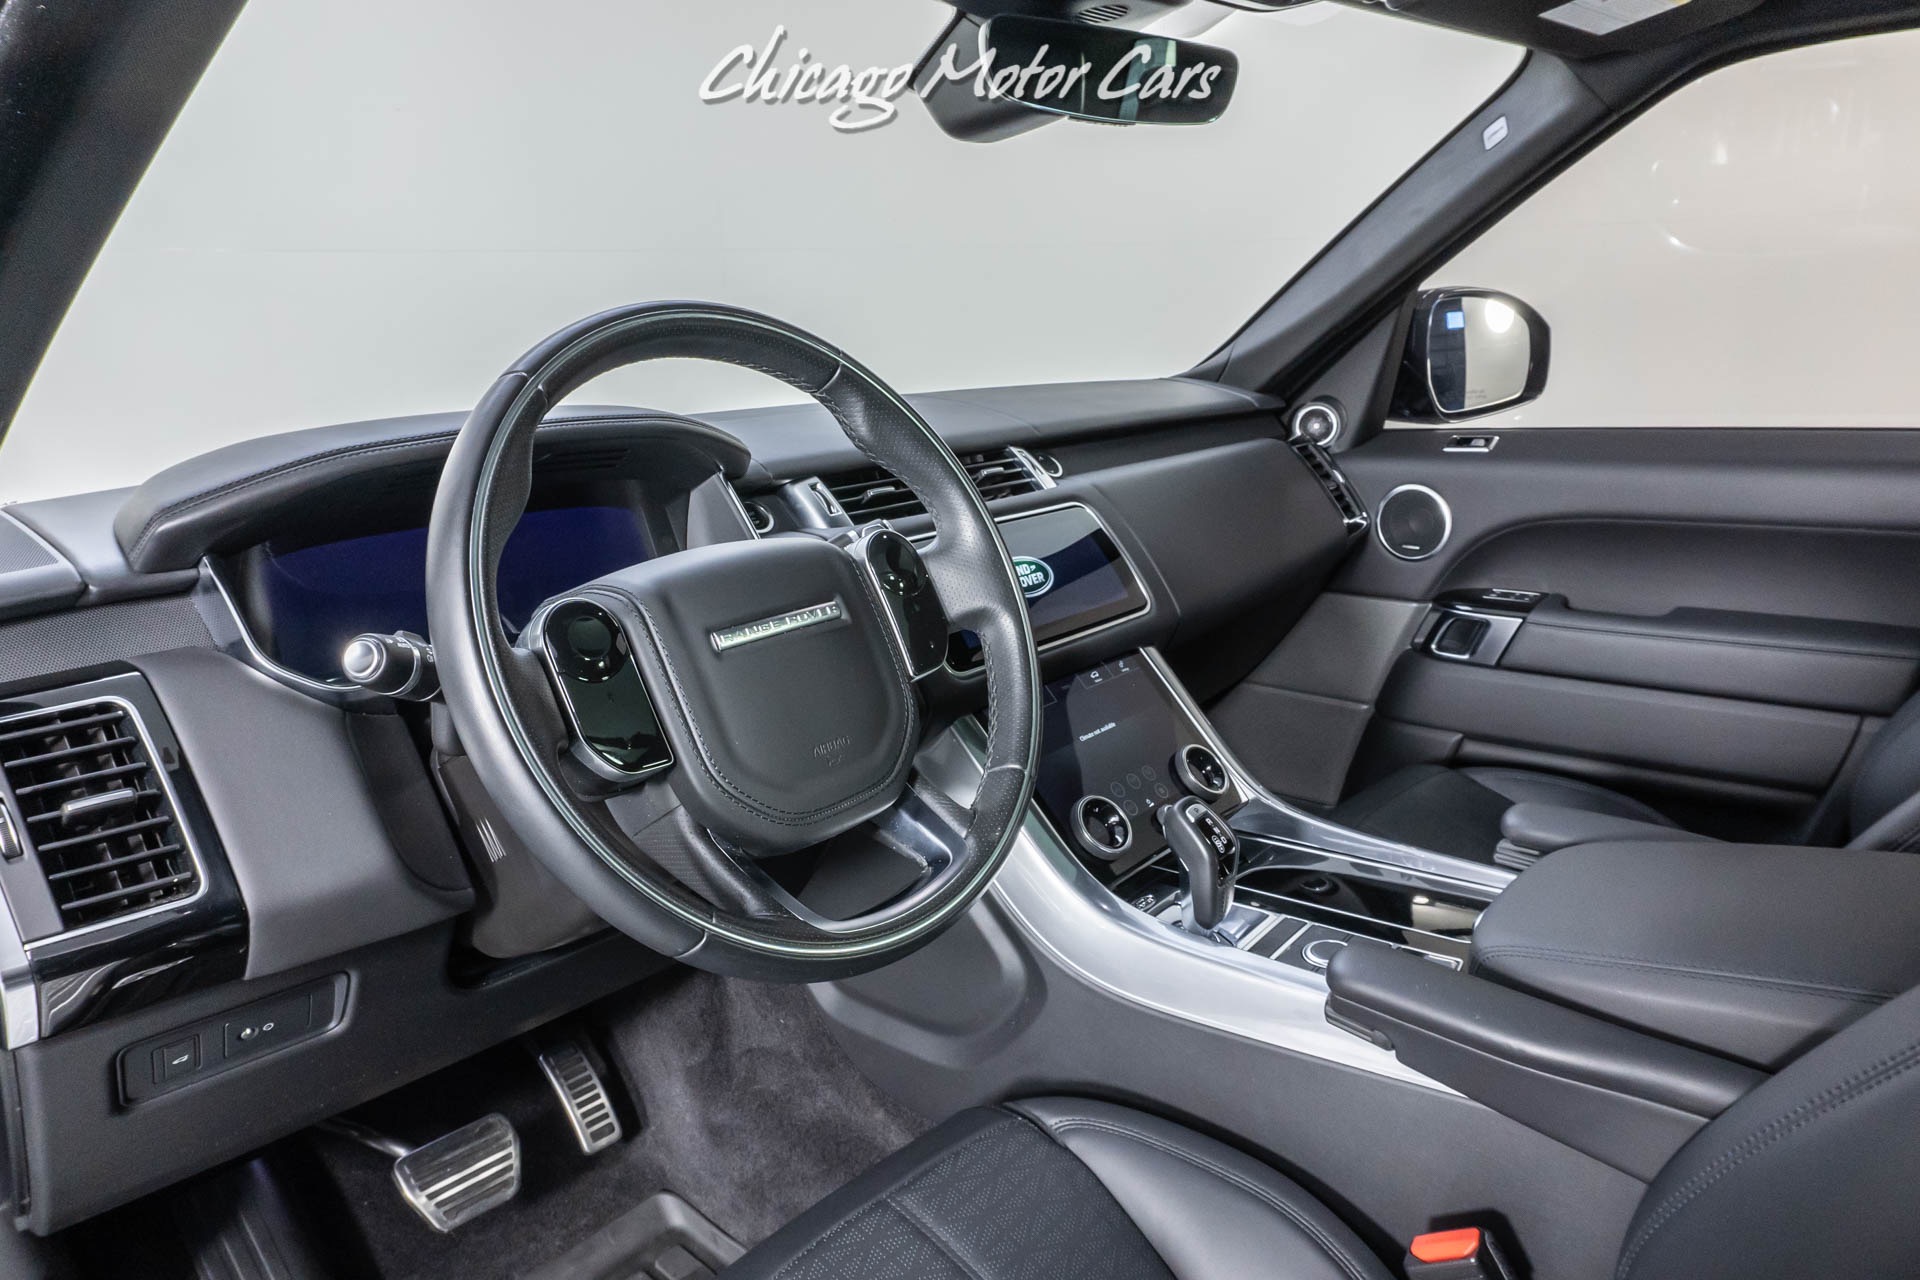 Used-2019-Land-Rover-Range-Rover-Sport-HSE-Dynamic-21s-Grand-Black-Veneers-LOADED-Serviced-PERFECT